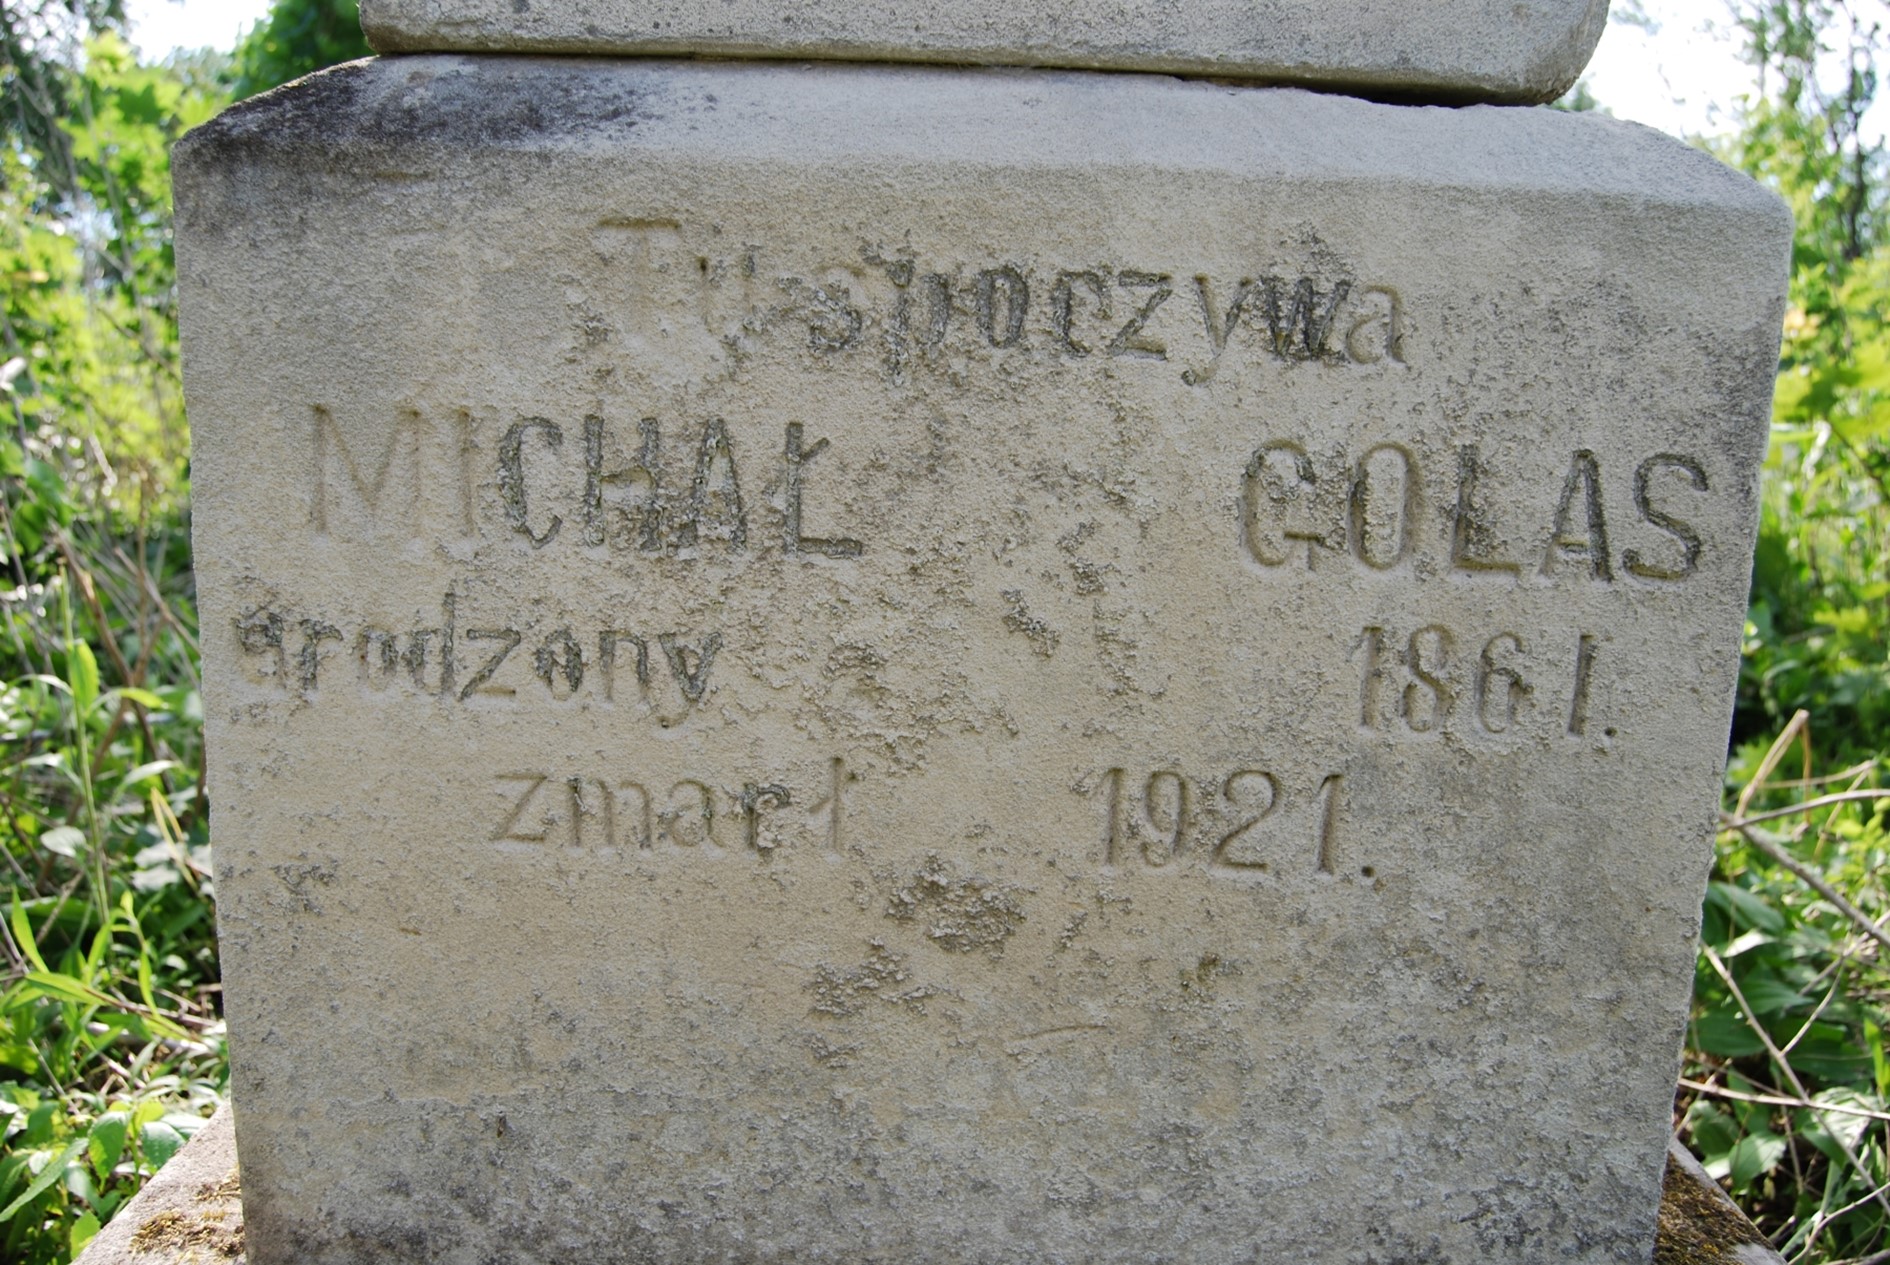 Fragment of the tombstone of Michal Golas, Zbarazh cemetery, as of 2018